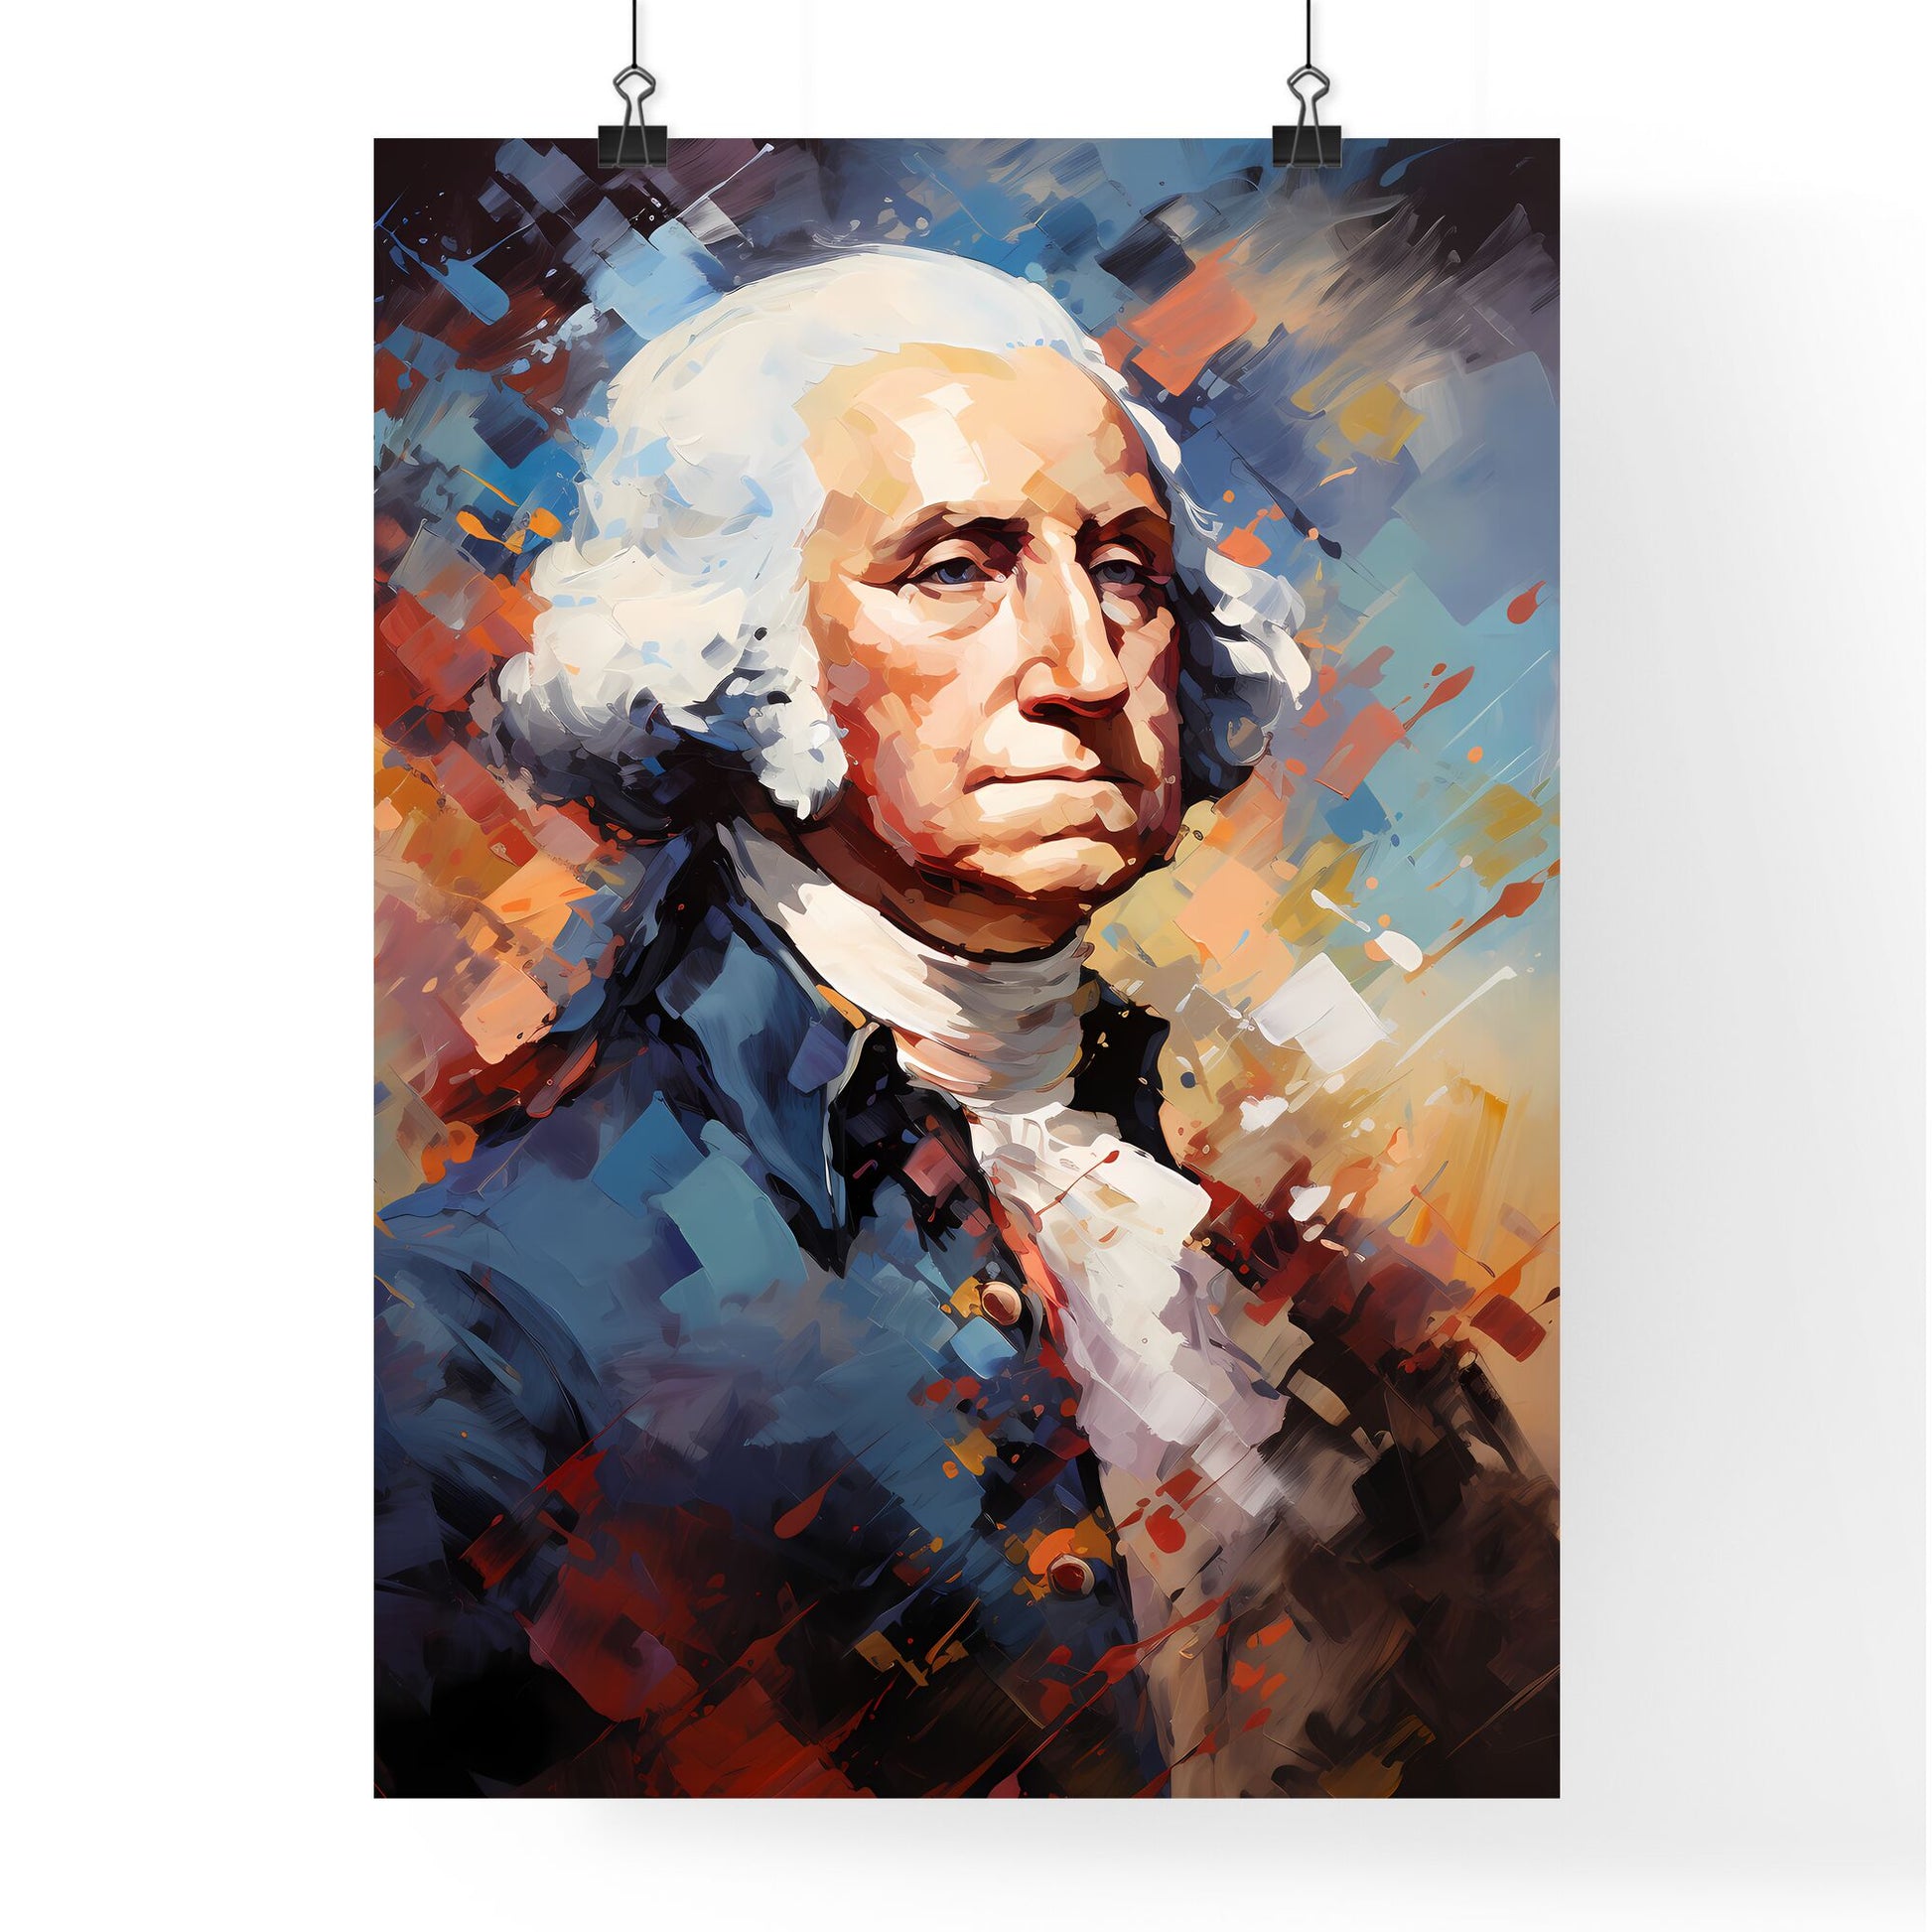 George Washington - A Painting Of A Man Default Title